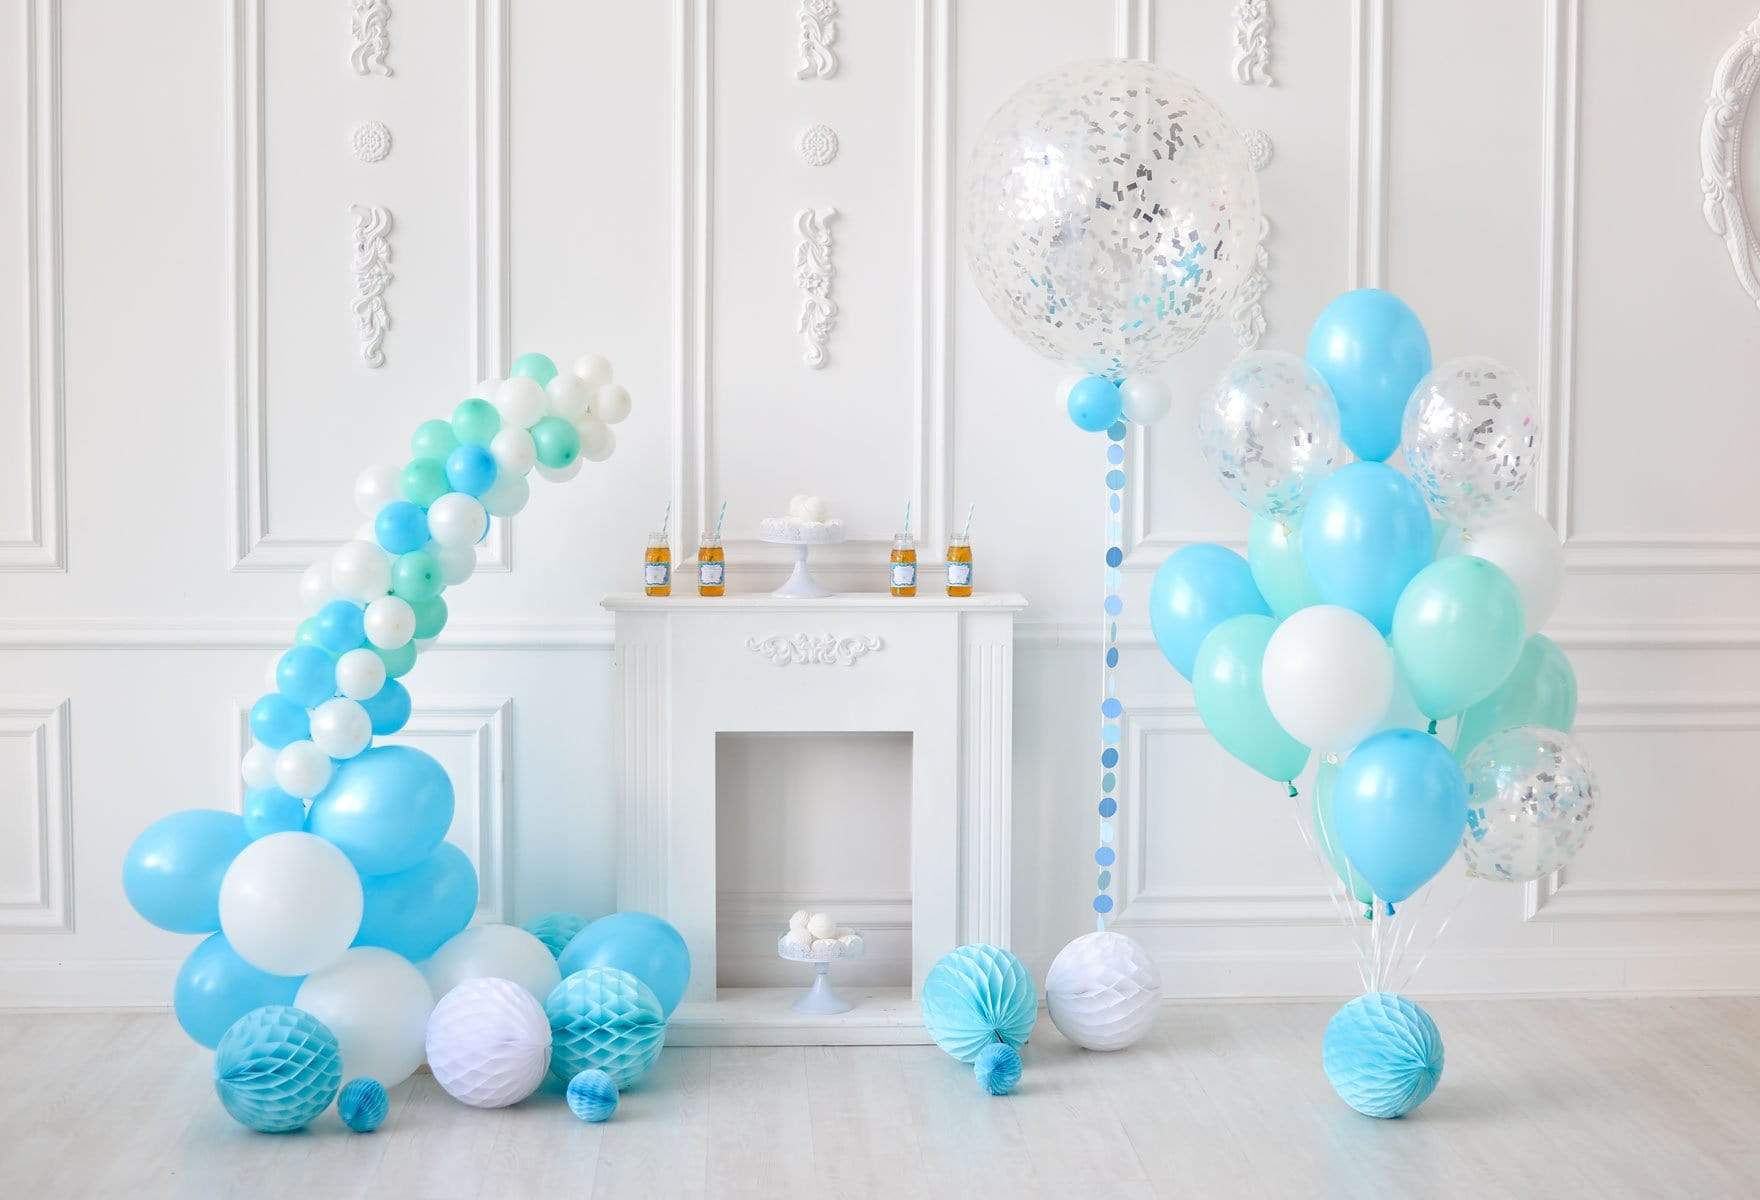 Kate White Wall with Balloons Birthday Backdrop for Photography